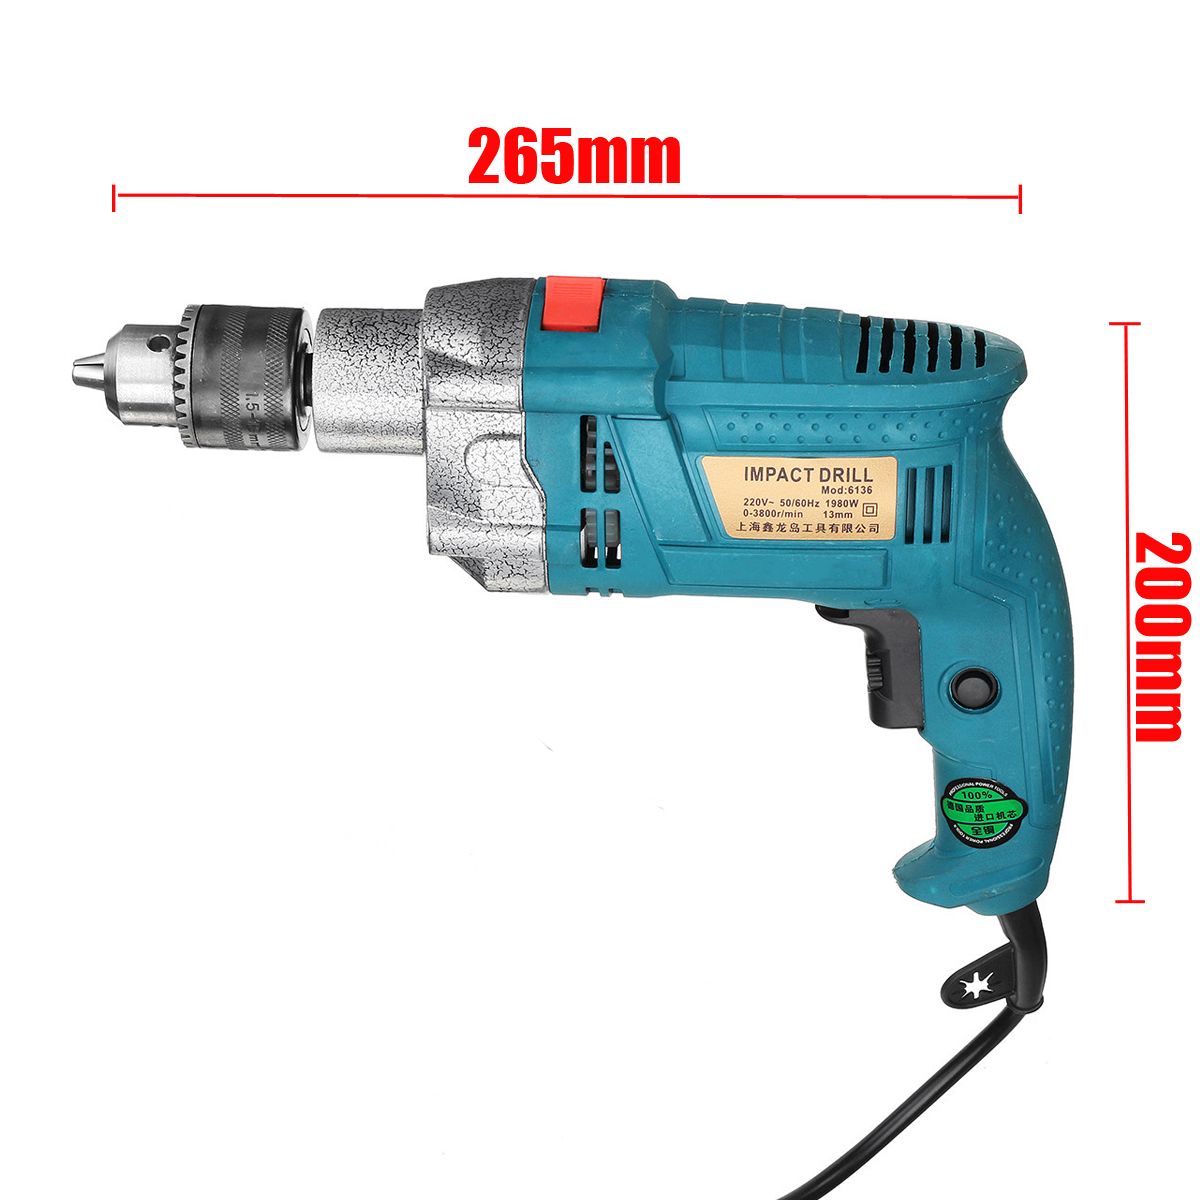 1980W-3800rpm-Electric-Impact-Drill-360deg-Rotary-Skid-Proof-Handle-With-Depth-Measuring-Scale-Spina-1715301